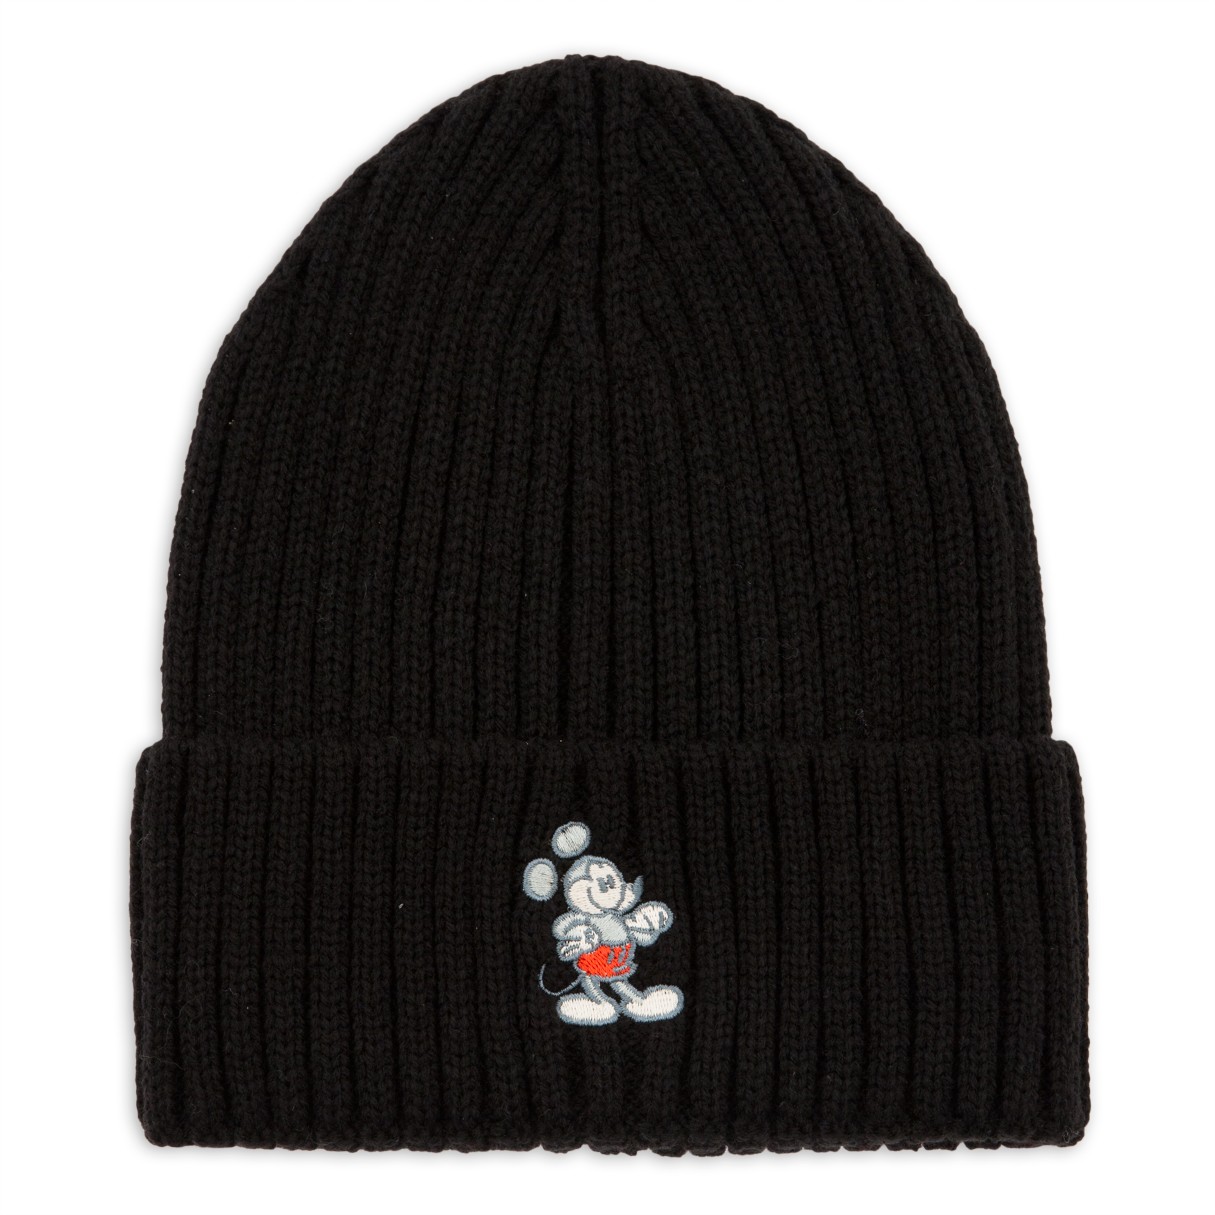 Mickey Mouse Genuine Mousewear Beanie Cap for Adults